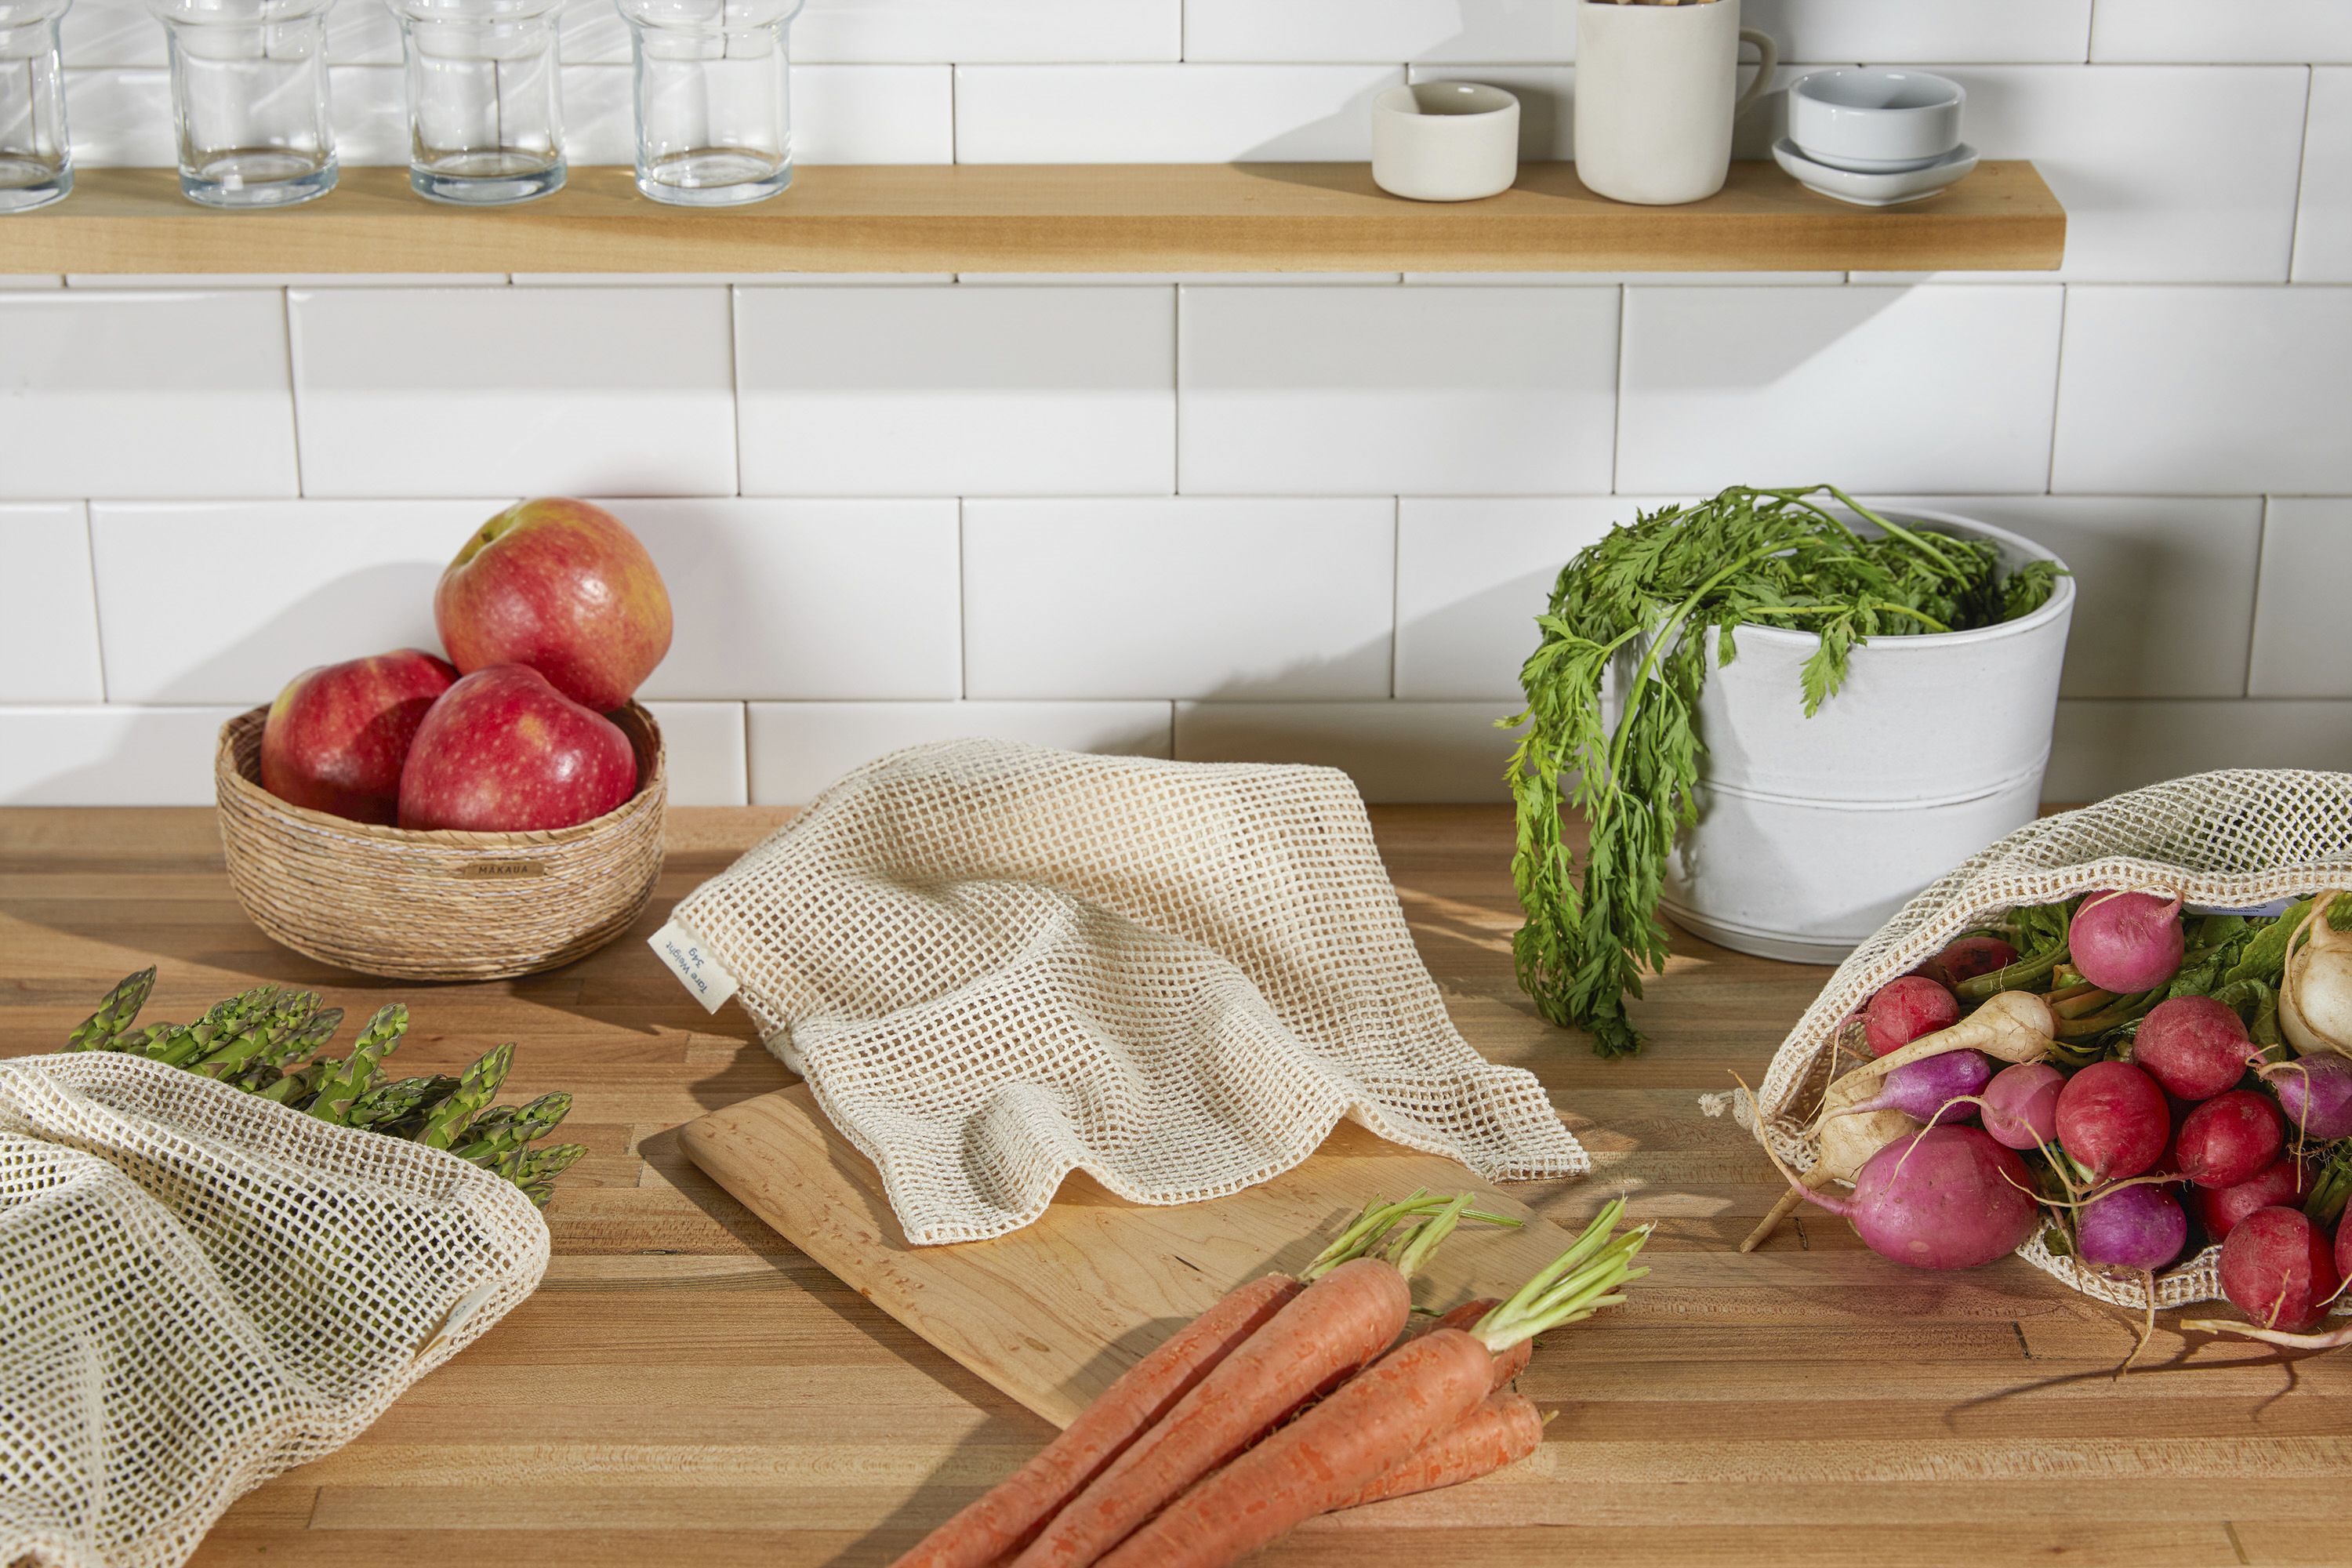 Images of vegetables on a counter with mesh bags in front of a white backsplash